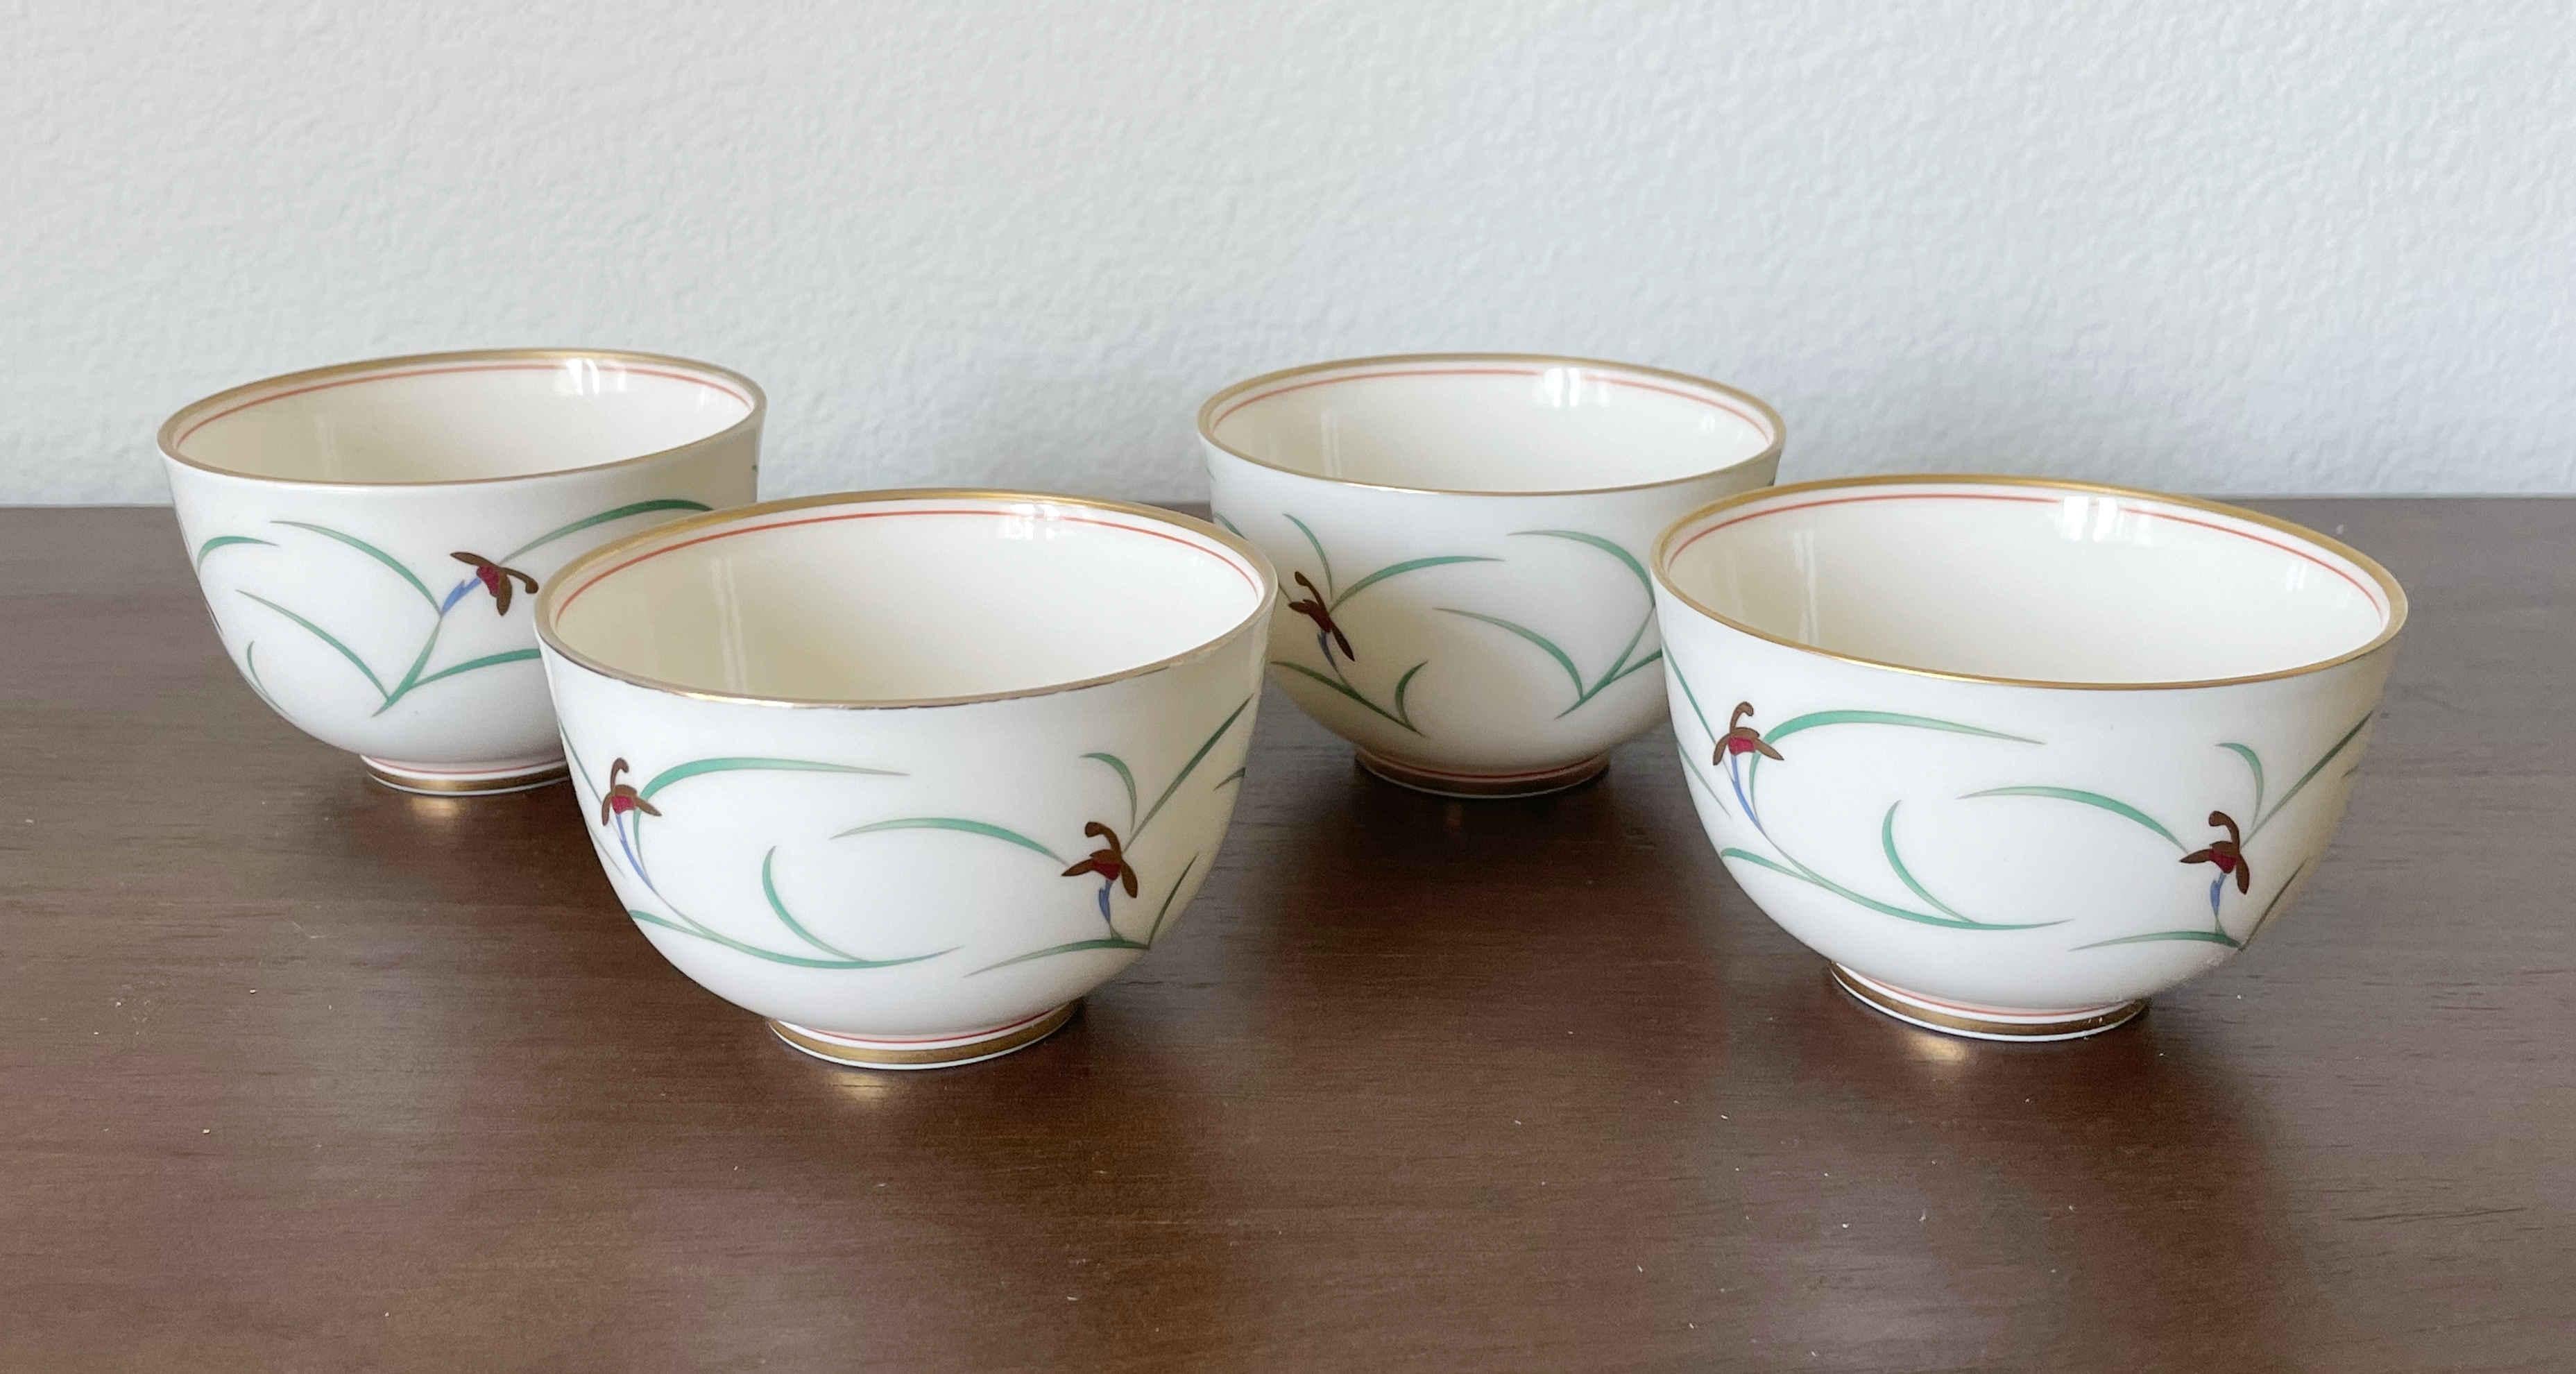 Elegant set of 4 Koransha tea cups, from Lindfield series, with delicately hand drawn spring orchids / Made in Japan in 2000s
Original mark at the base
Diameter 3.5 inches, height 2 inches
Set available in stock in Los Angeles
Order reference #: